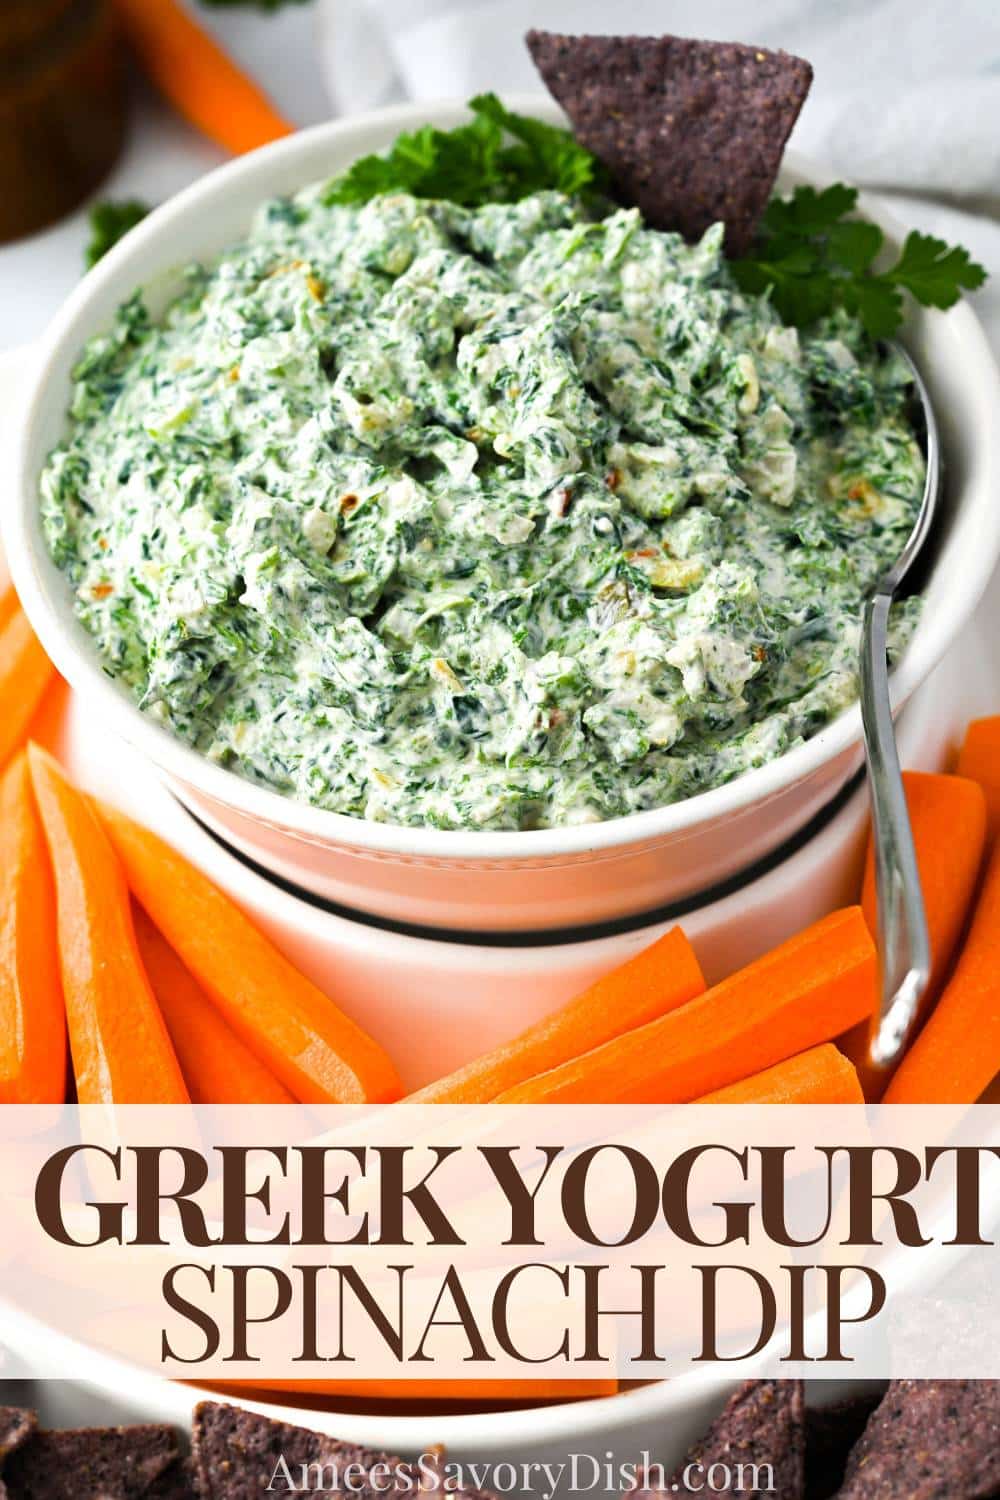 This Spinach Dip with Greek Yogurt is a timeless cold dip reimagined! It’s just as cool, creamy, quick, easy, and downright delicious as the old-school Knorr version made with mayo but with less fat and MUCH more protein. via @Ameessavorydish